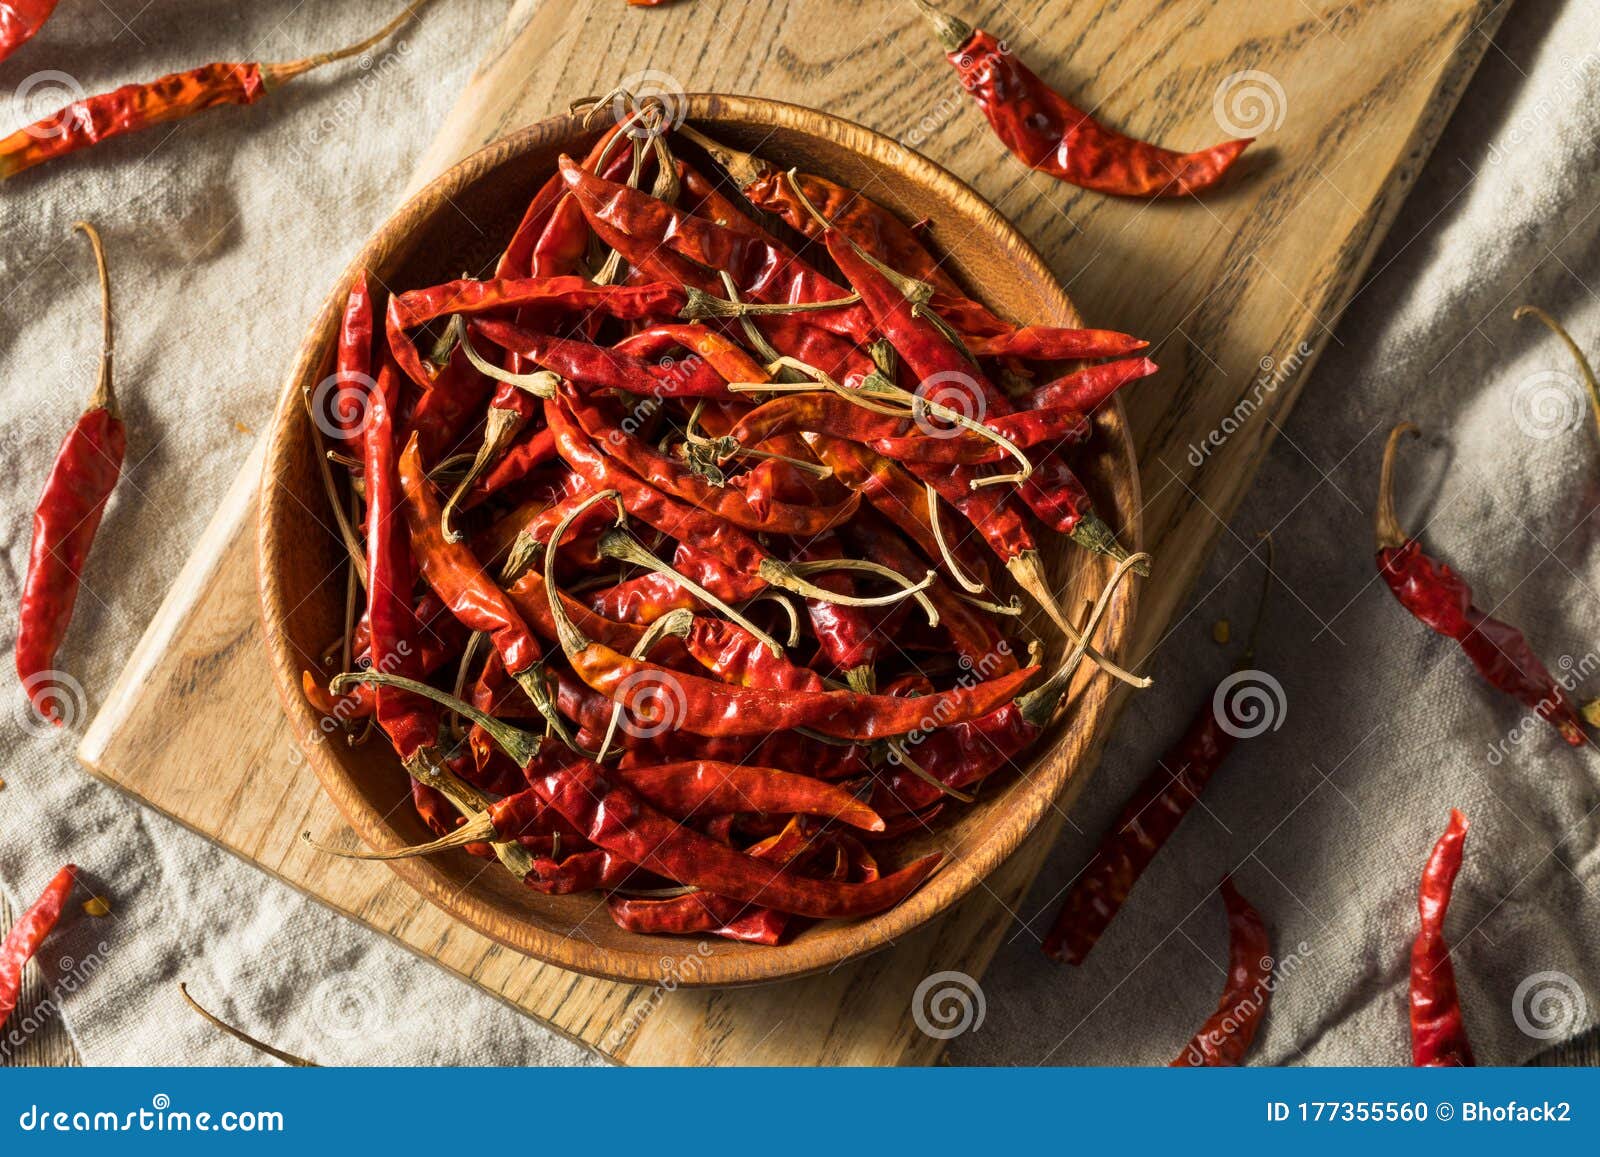 raw red organic chile de arbol peppers